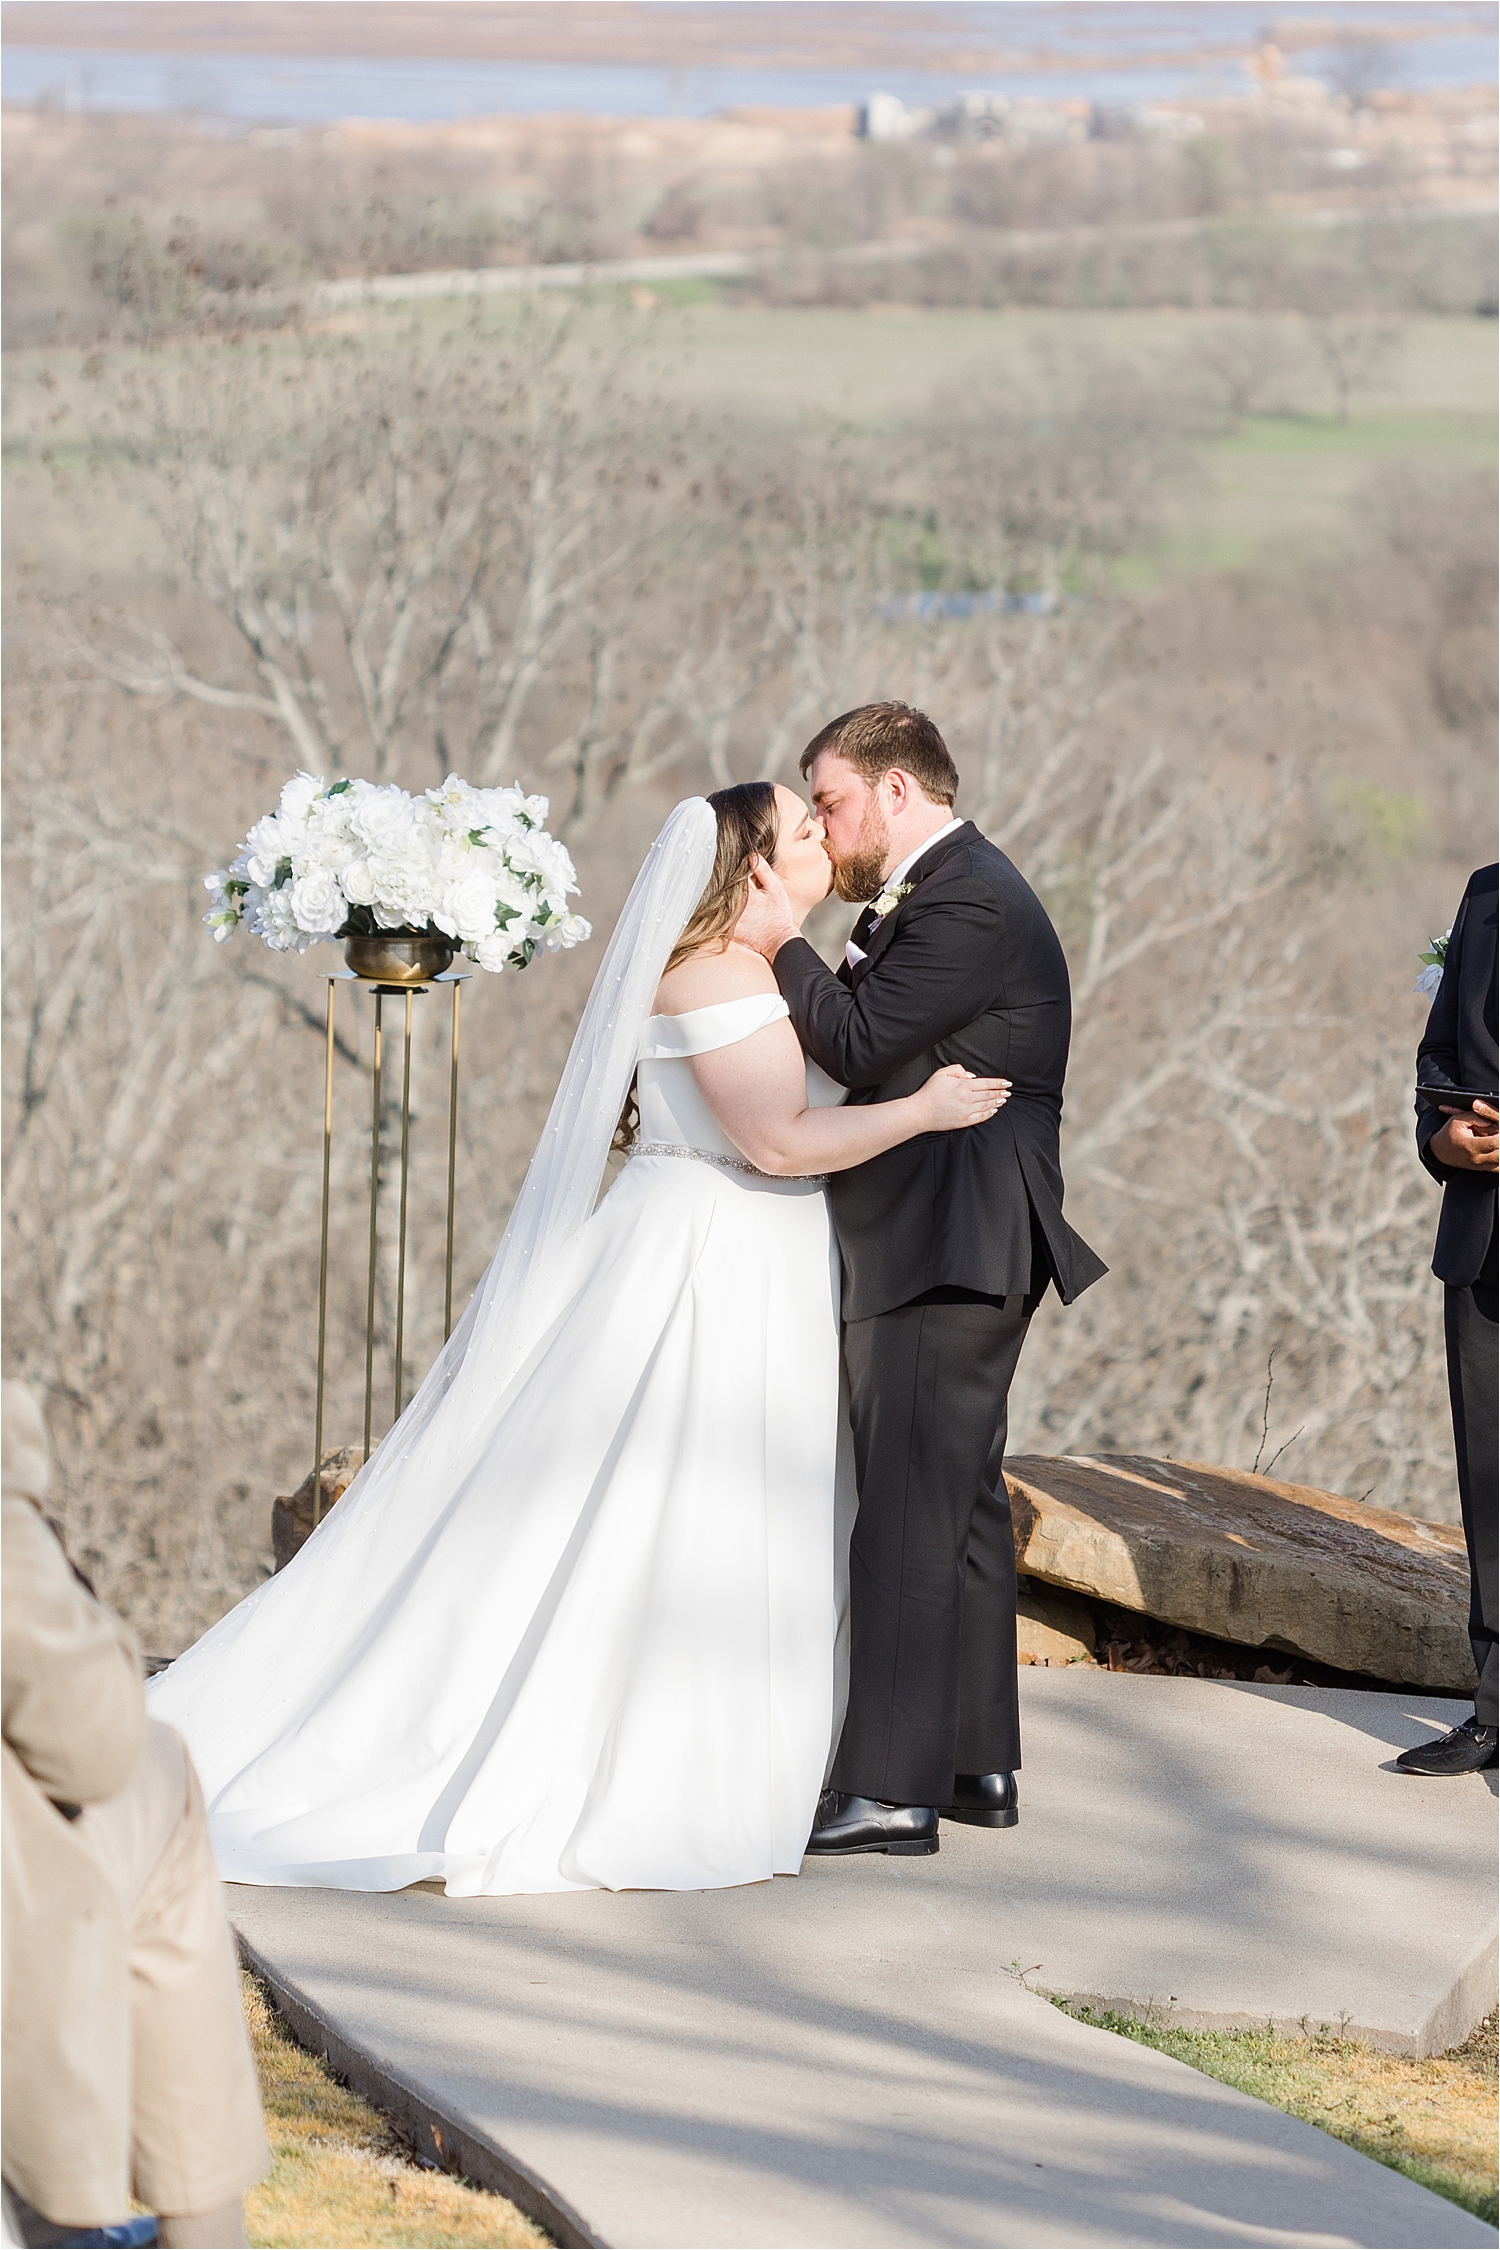 Brandi and Wade kissing at the altar of their Dream Point Ranch Wedding.